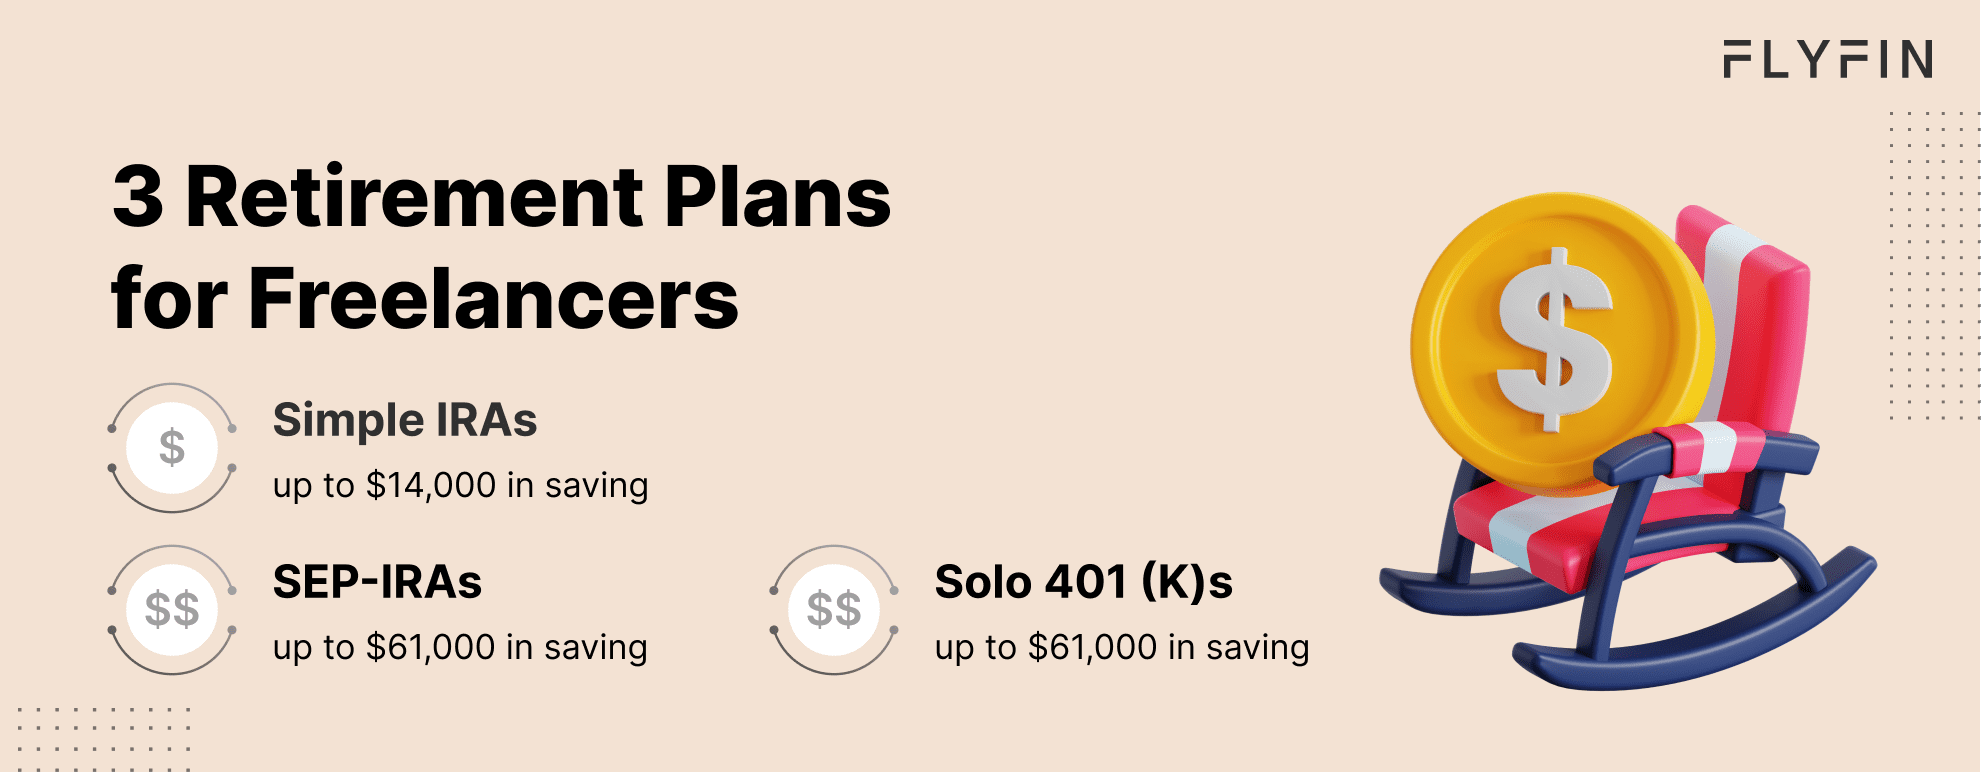 Image with text about retirement plans for freelancers including Simple IRAs, SEP-lRAs and solo 401(K)s with savings up to $61,000. Relevant for self-employed and 1099 workers managing taxes.